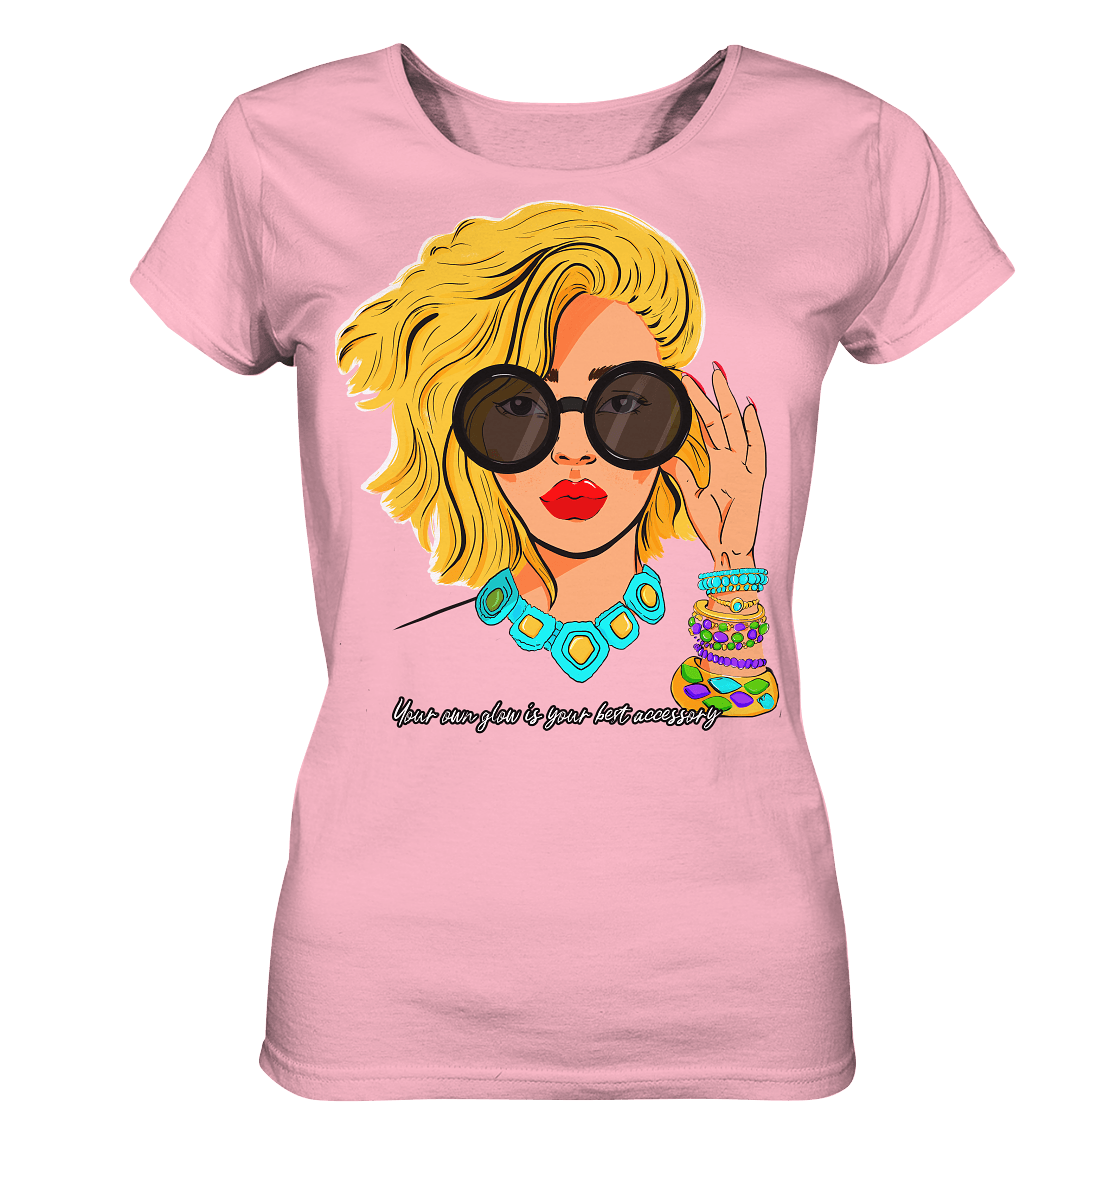 WOMEN-Print-T-Shirt-in-rosa-mit-kunstvollem-Print-Women-fashion-face-your-own-glow-is-your-best-accessory